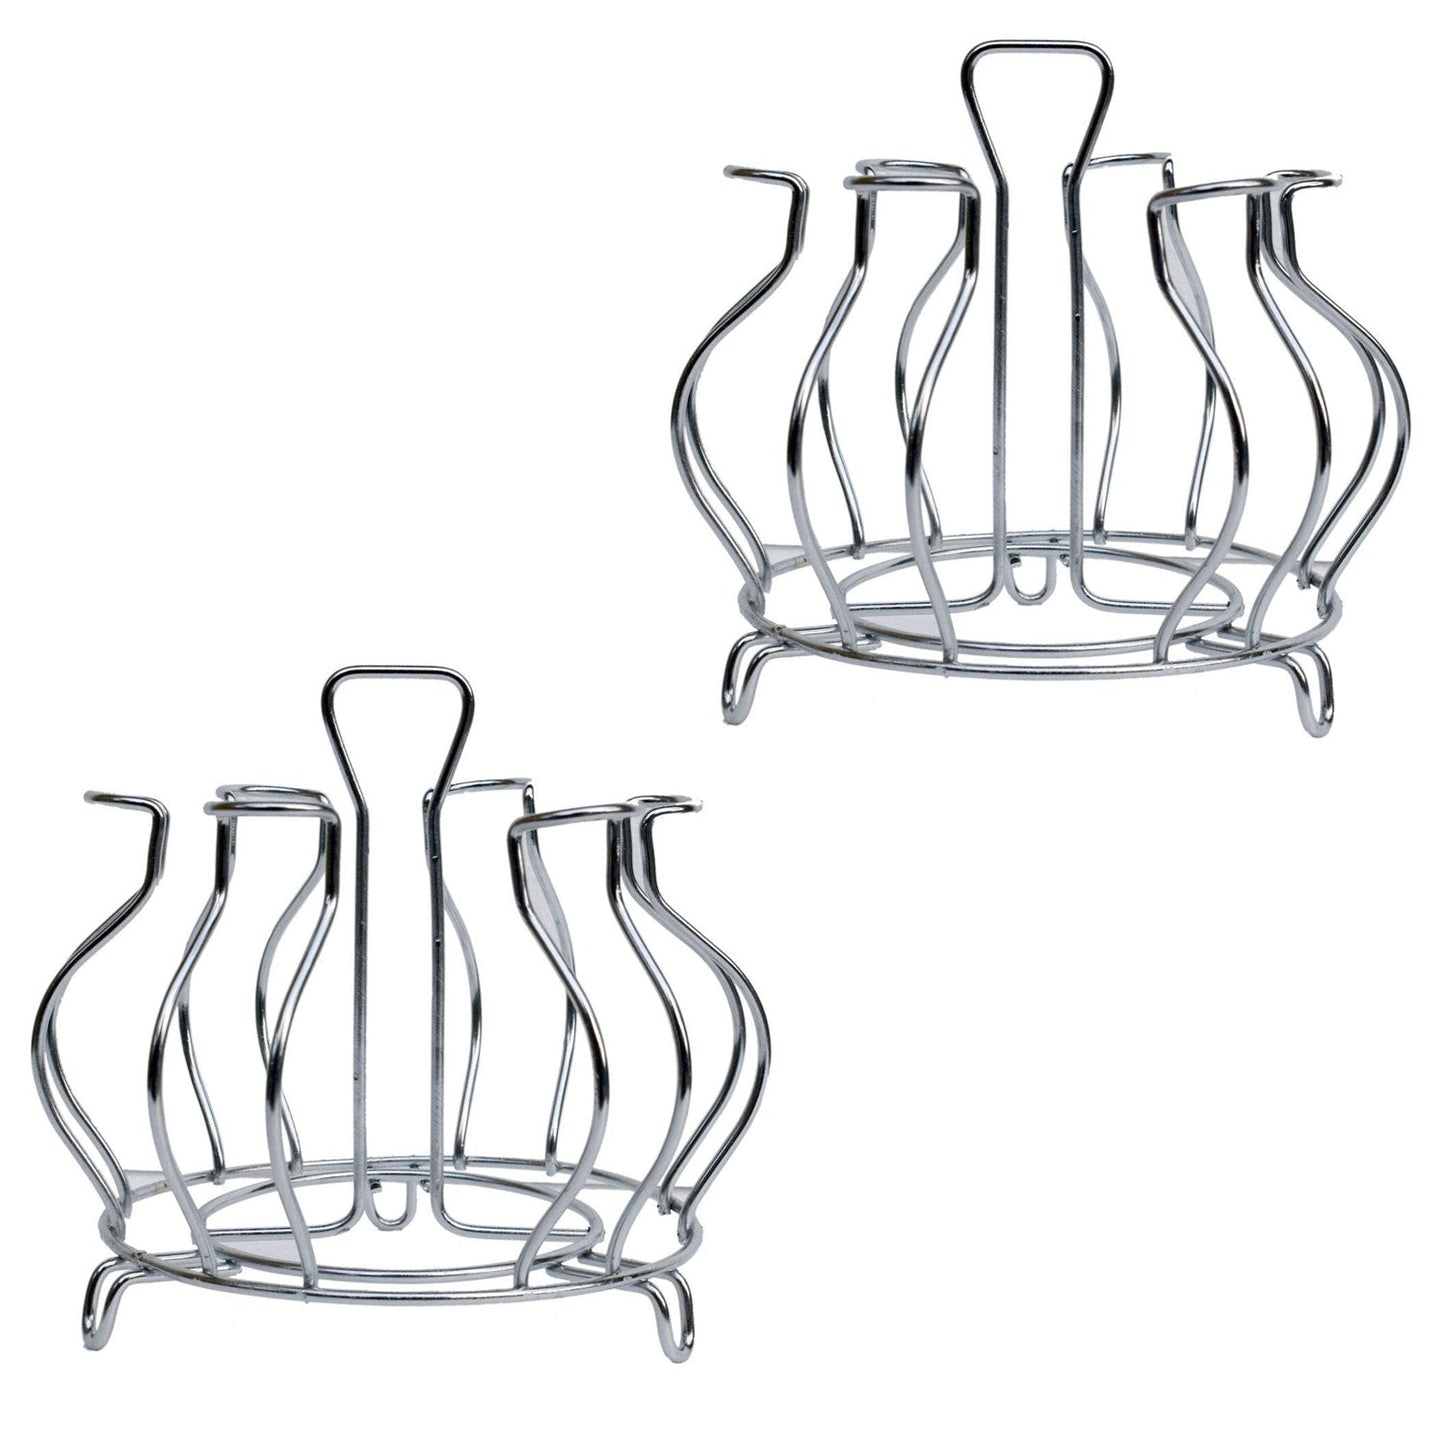 2134 Stainless Steel Glass Holder Glass Hanging Organizer for Kitchen Bars Pubs DeoDap